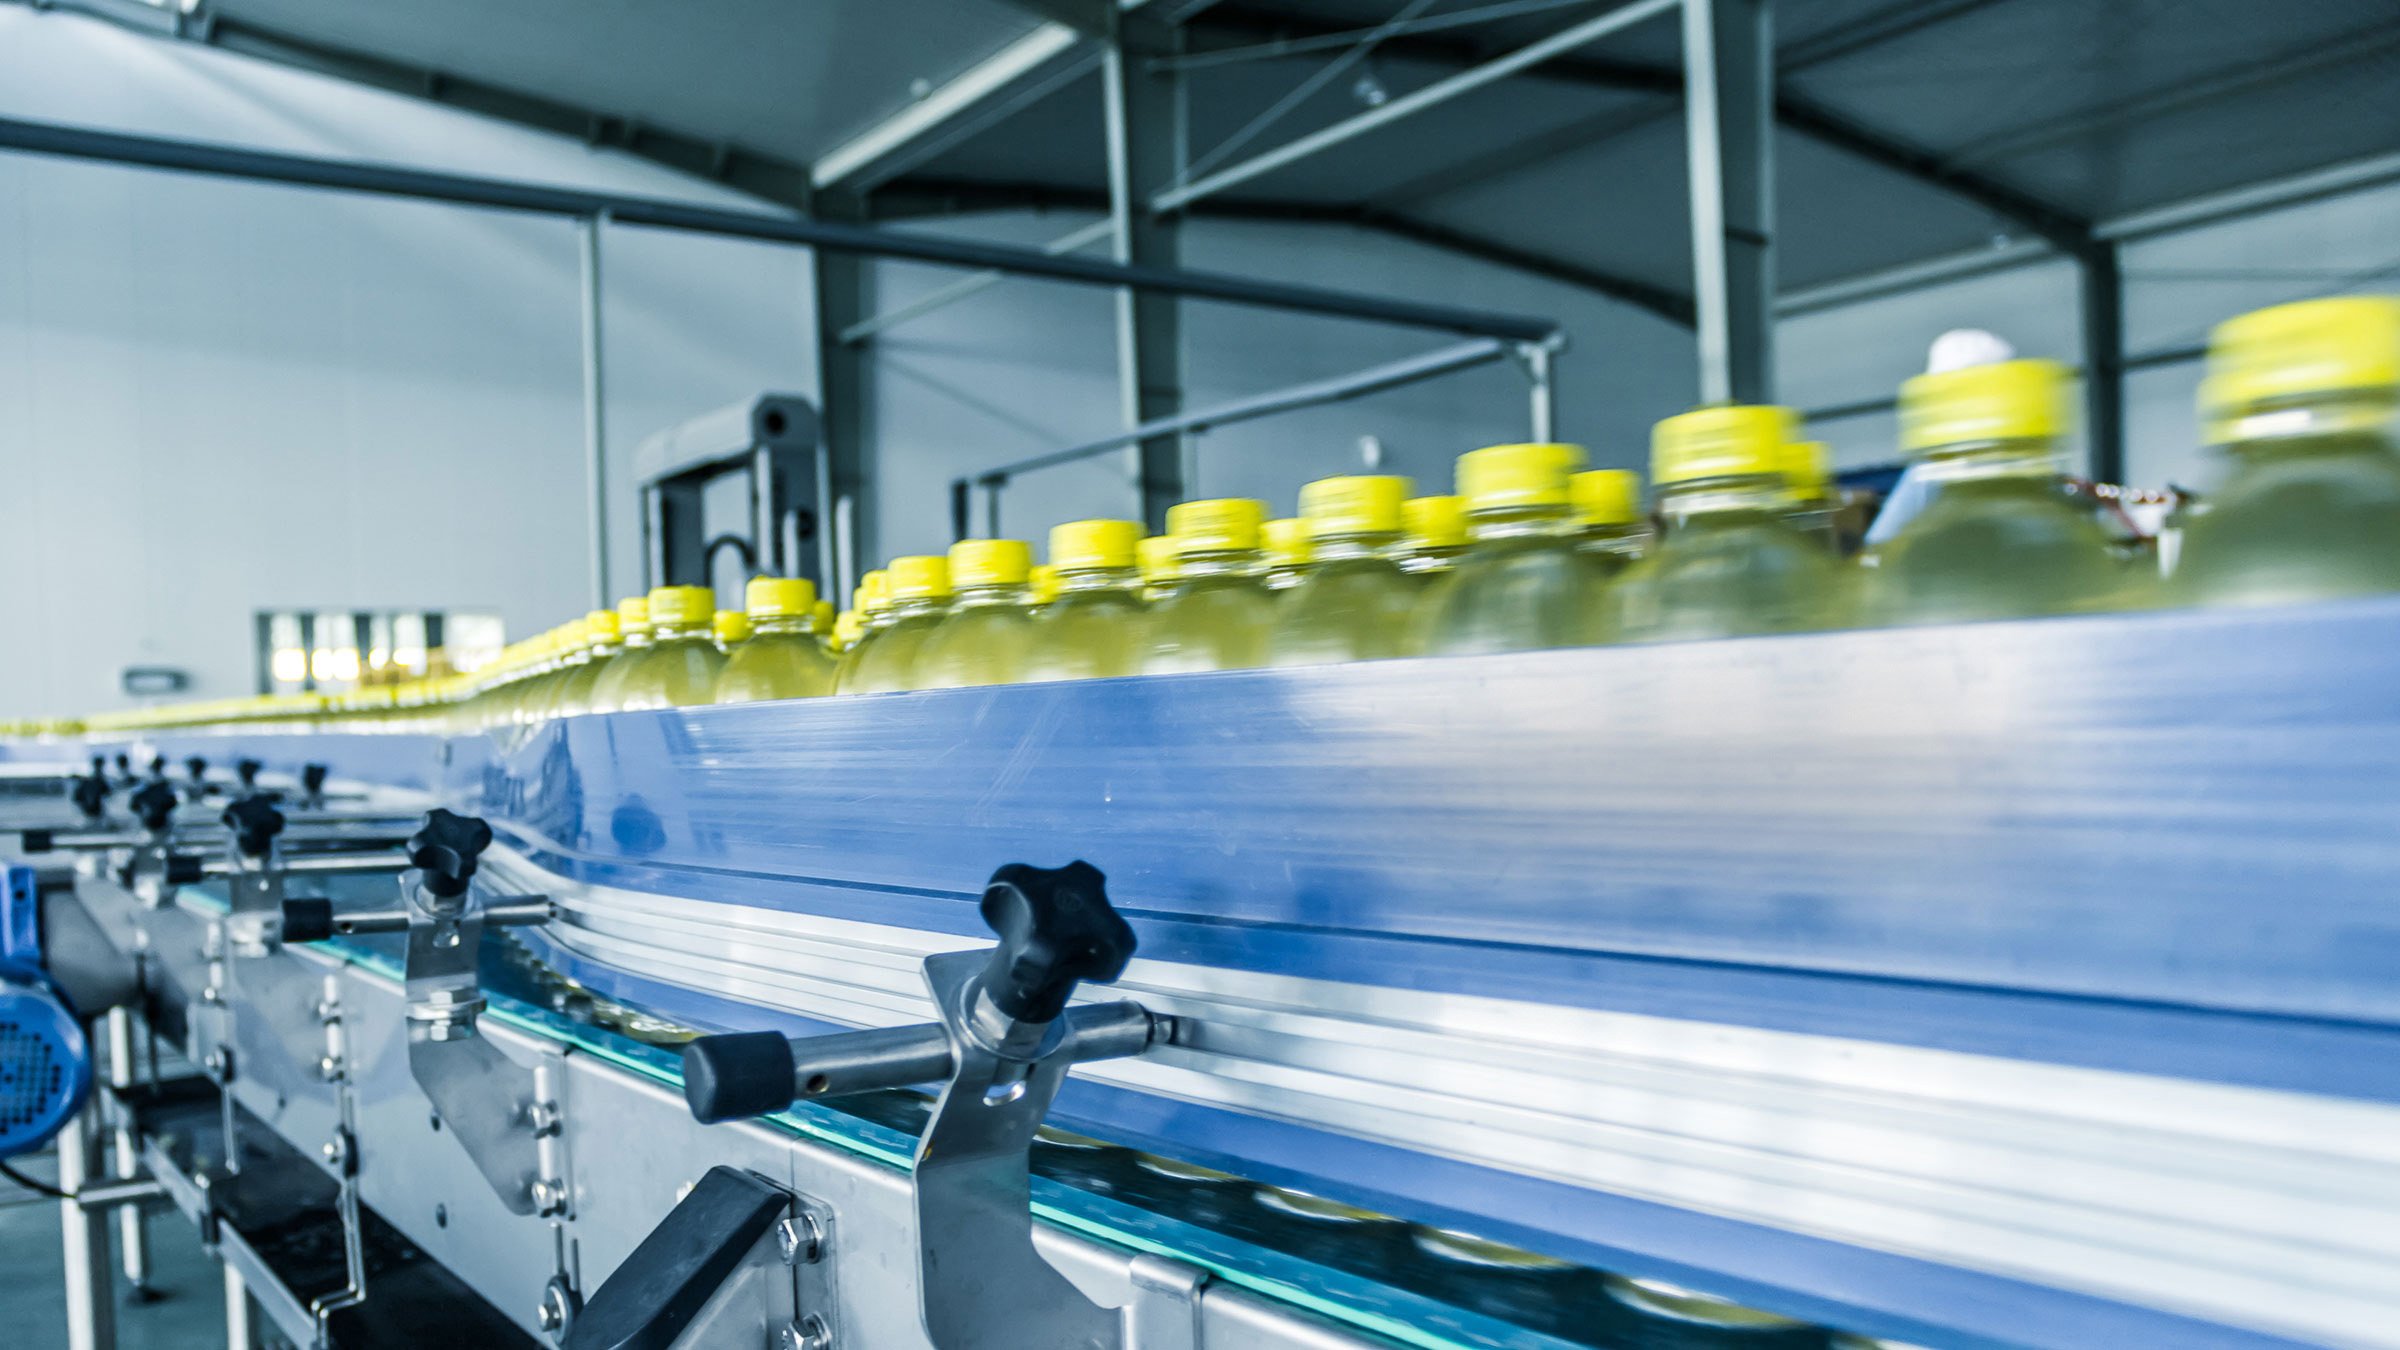 Water bottles on production line.